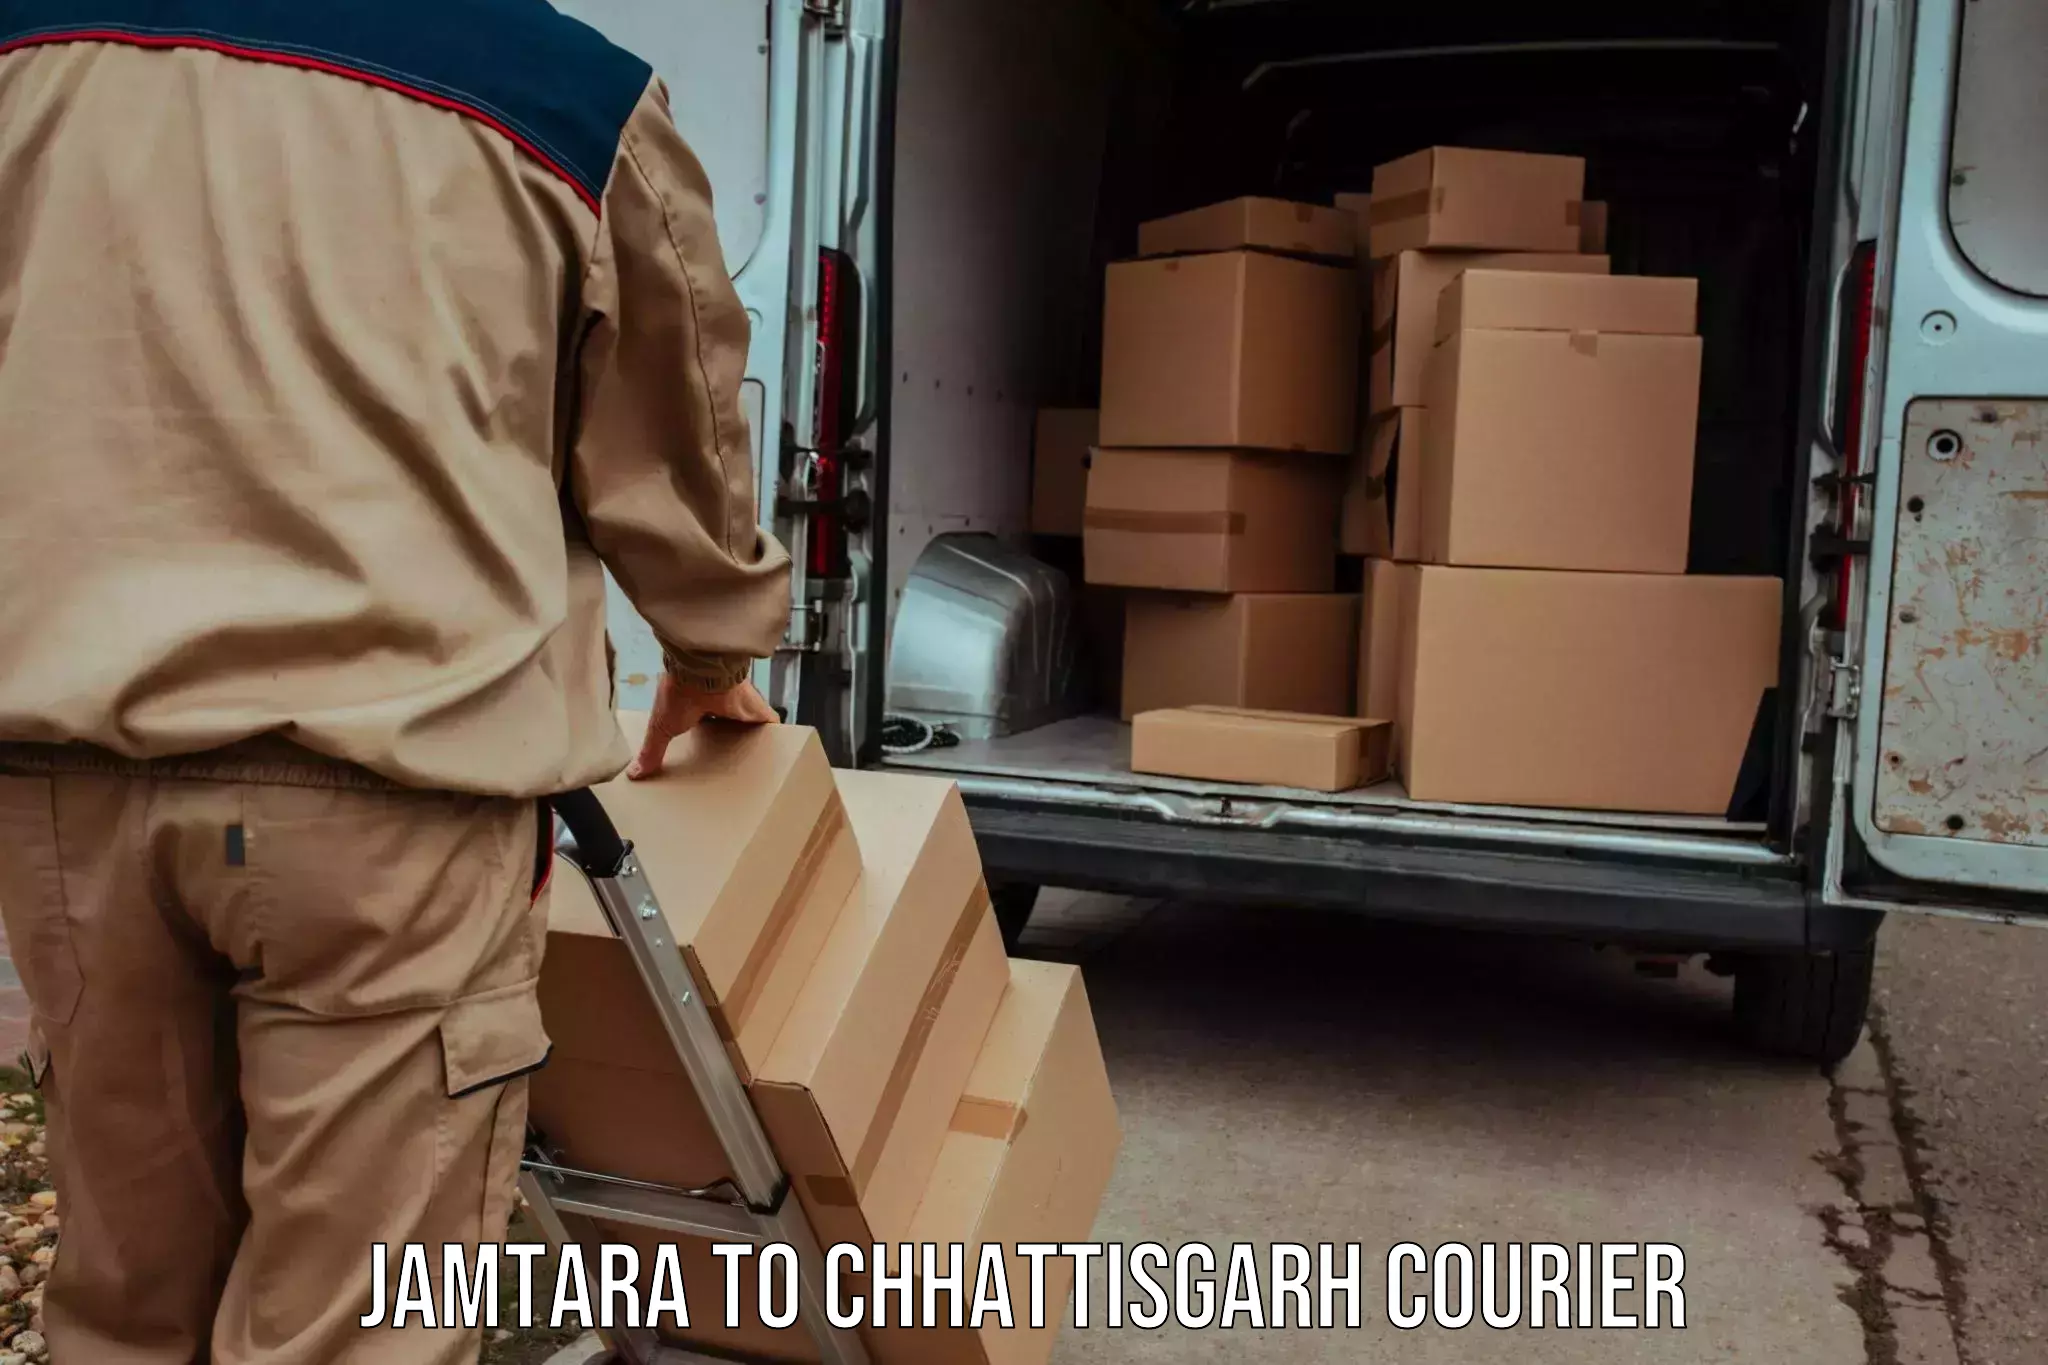 On-call courier service in Jamtara to Bastar